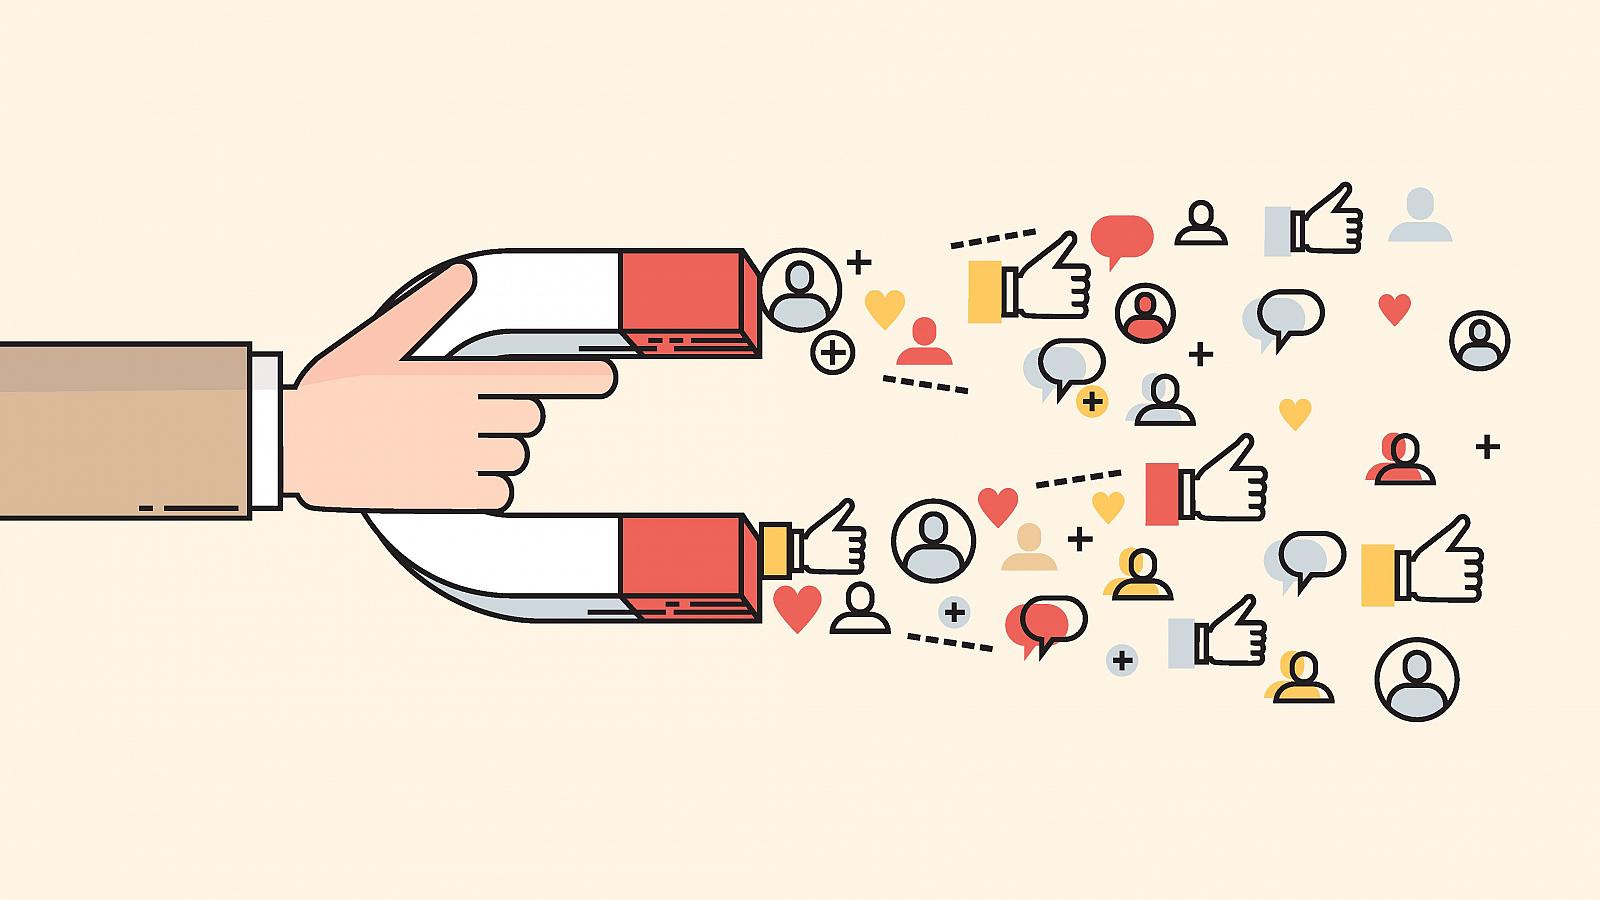 How B2B marketers can get the most out of influencers